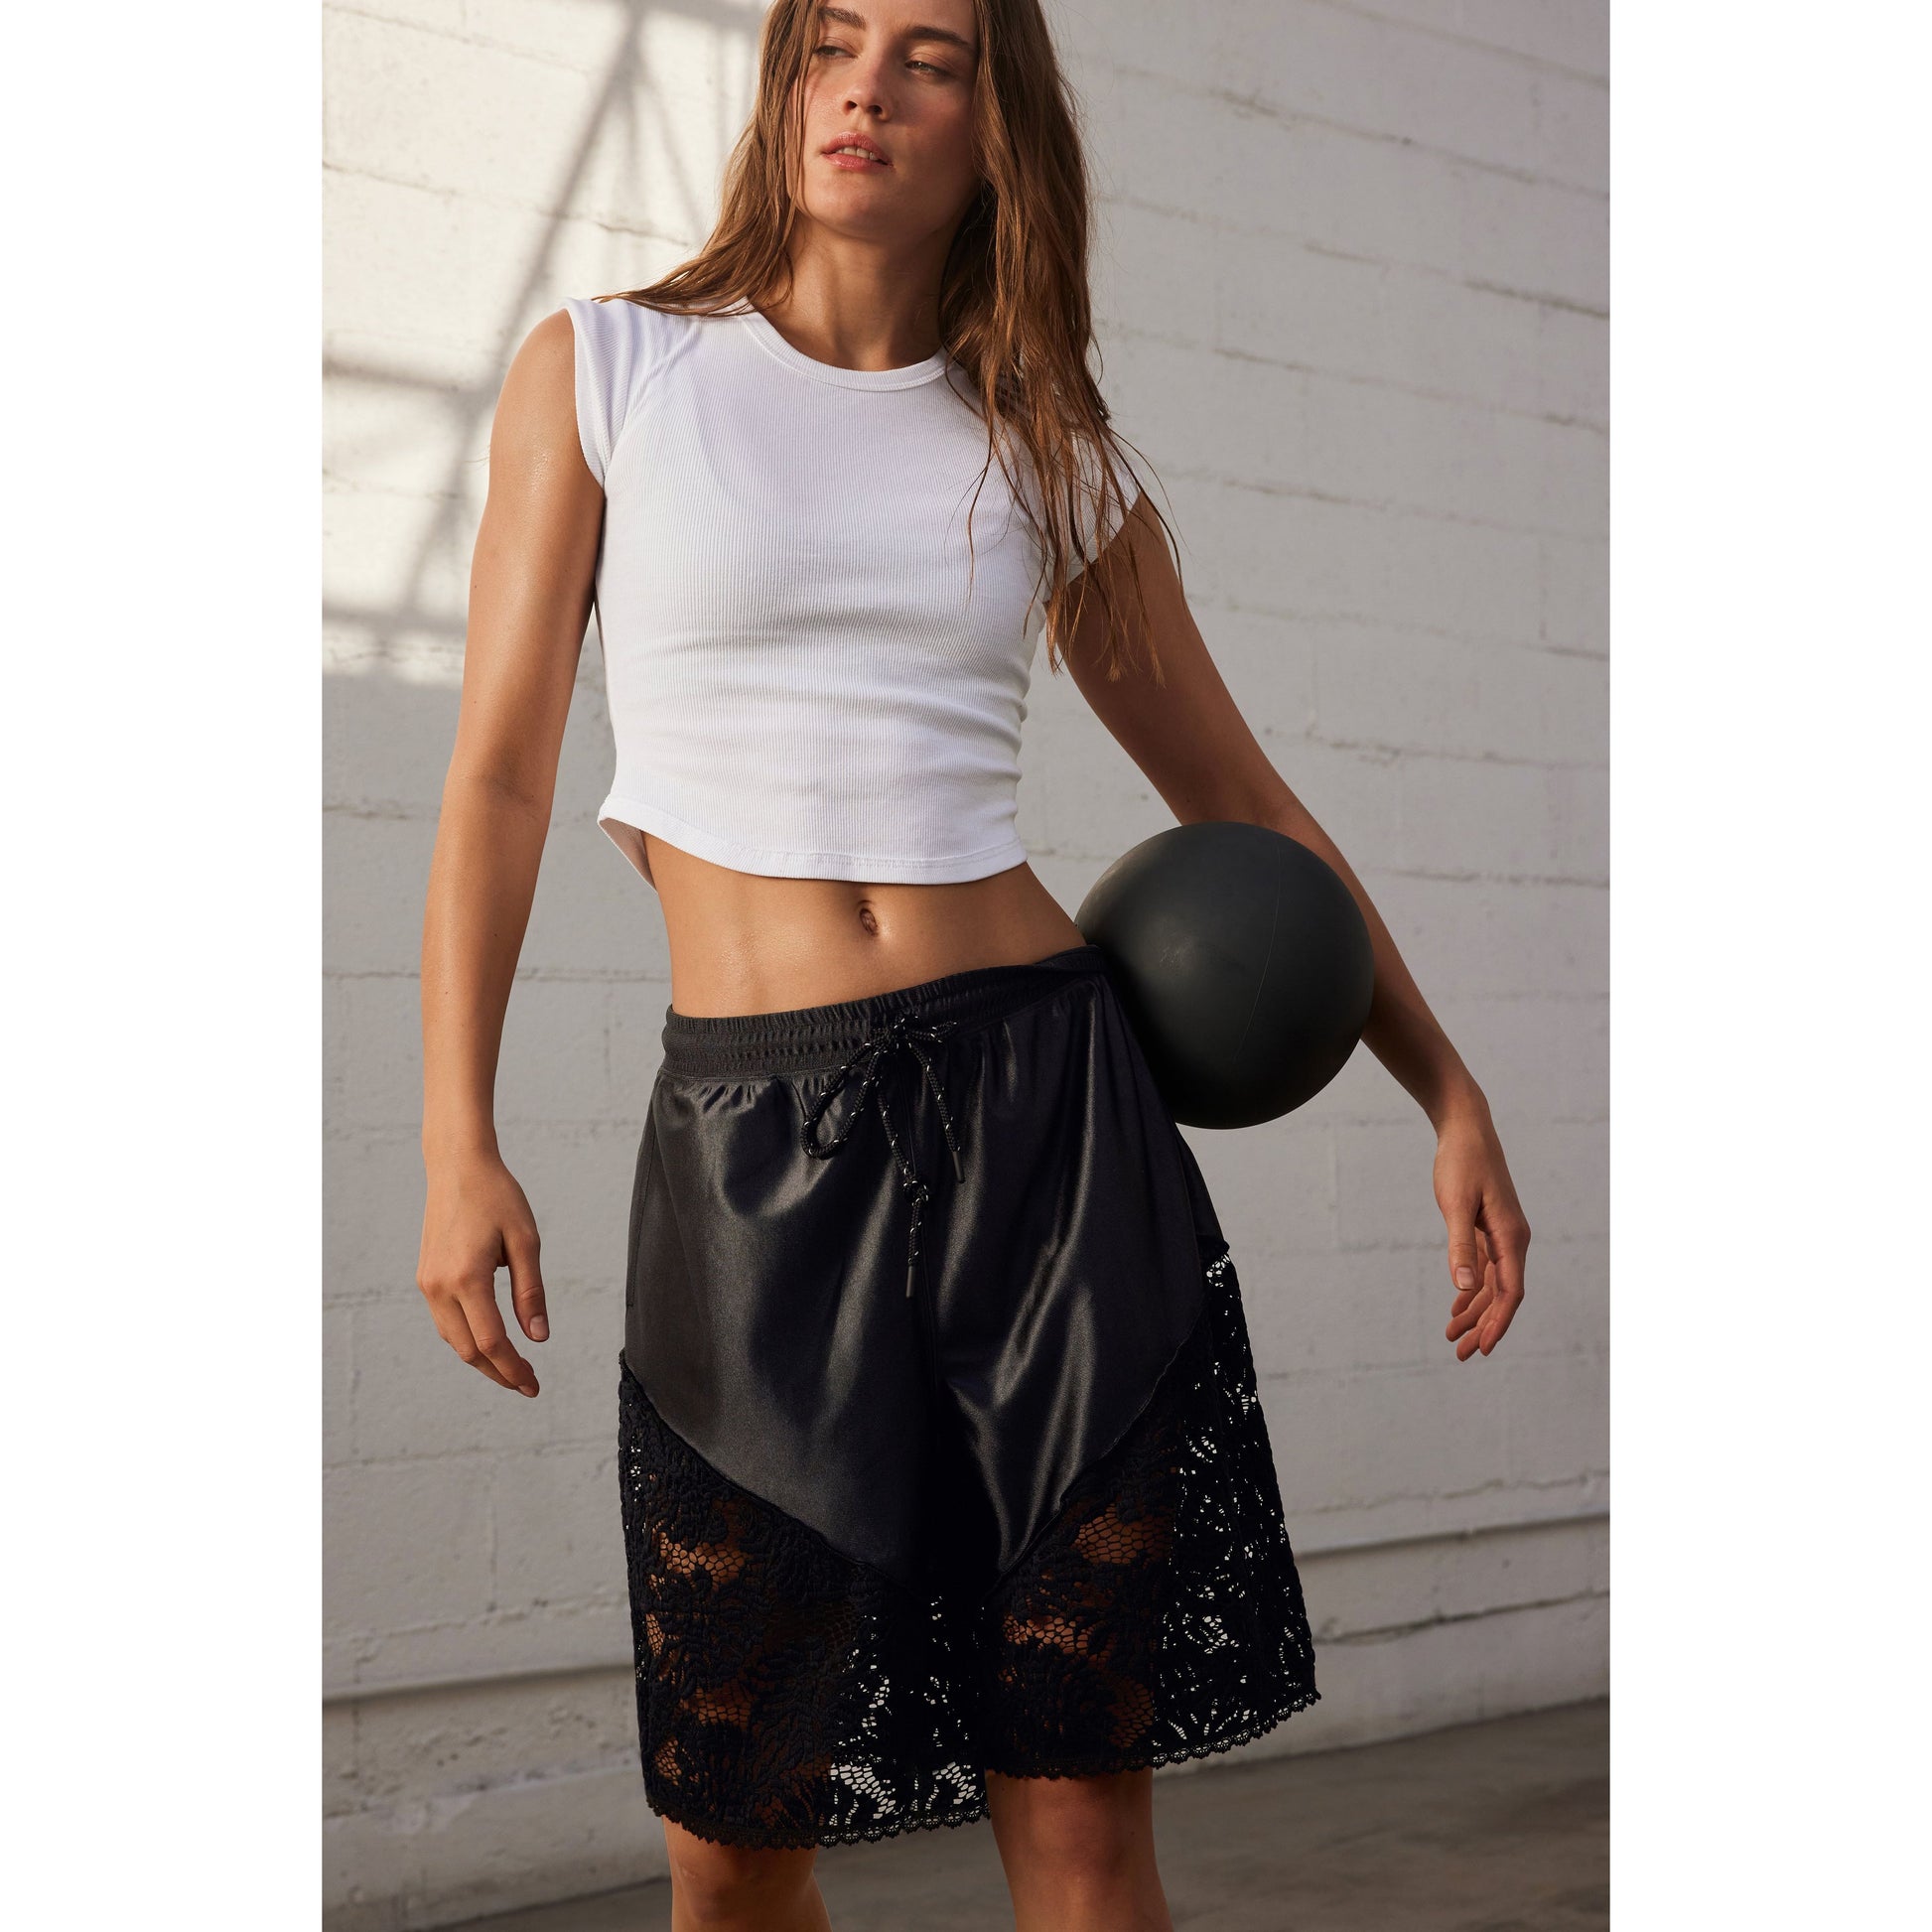 Woman in a Ribbed Baby Tee in White and black lace-trimmed shorts holding a medicine ball against a white wall by Free People Movement.